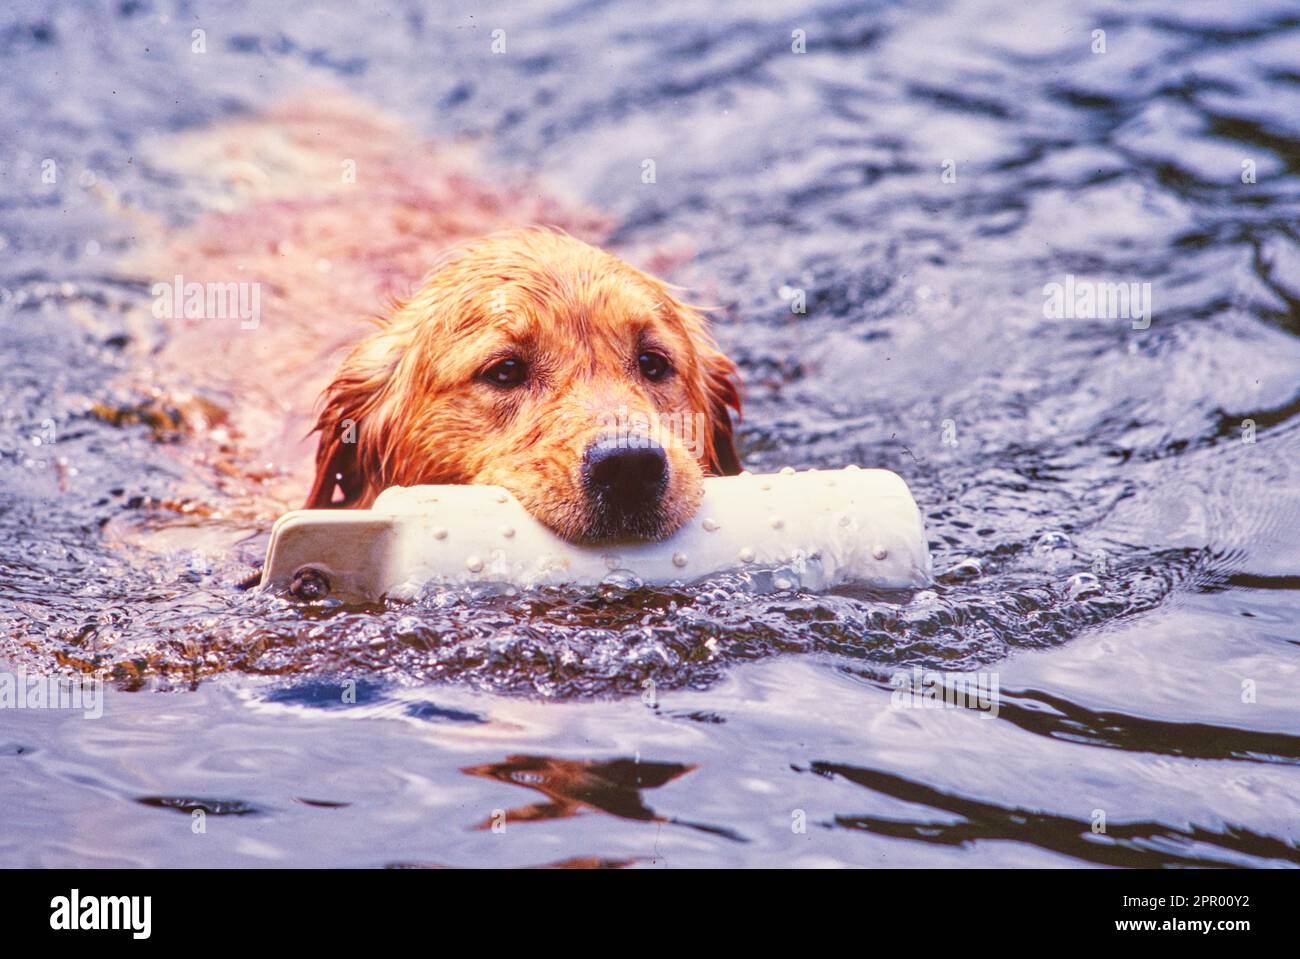 Golden retriever holding floating water toy in mouth while swimming Stock Photo